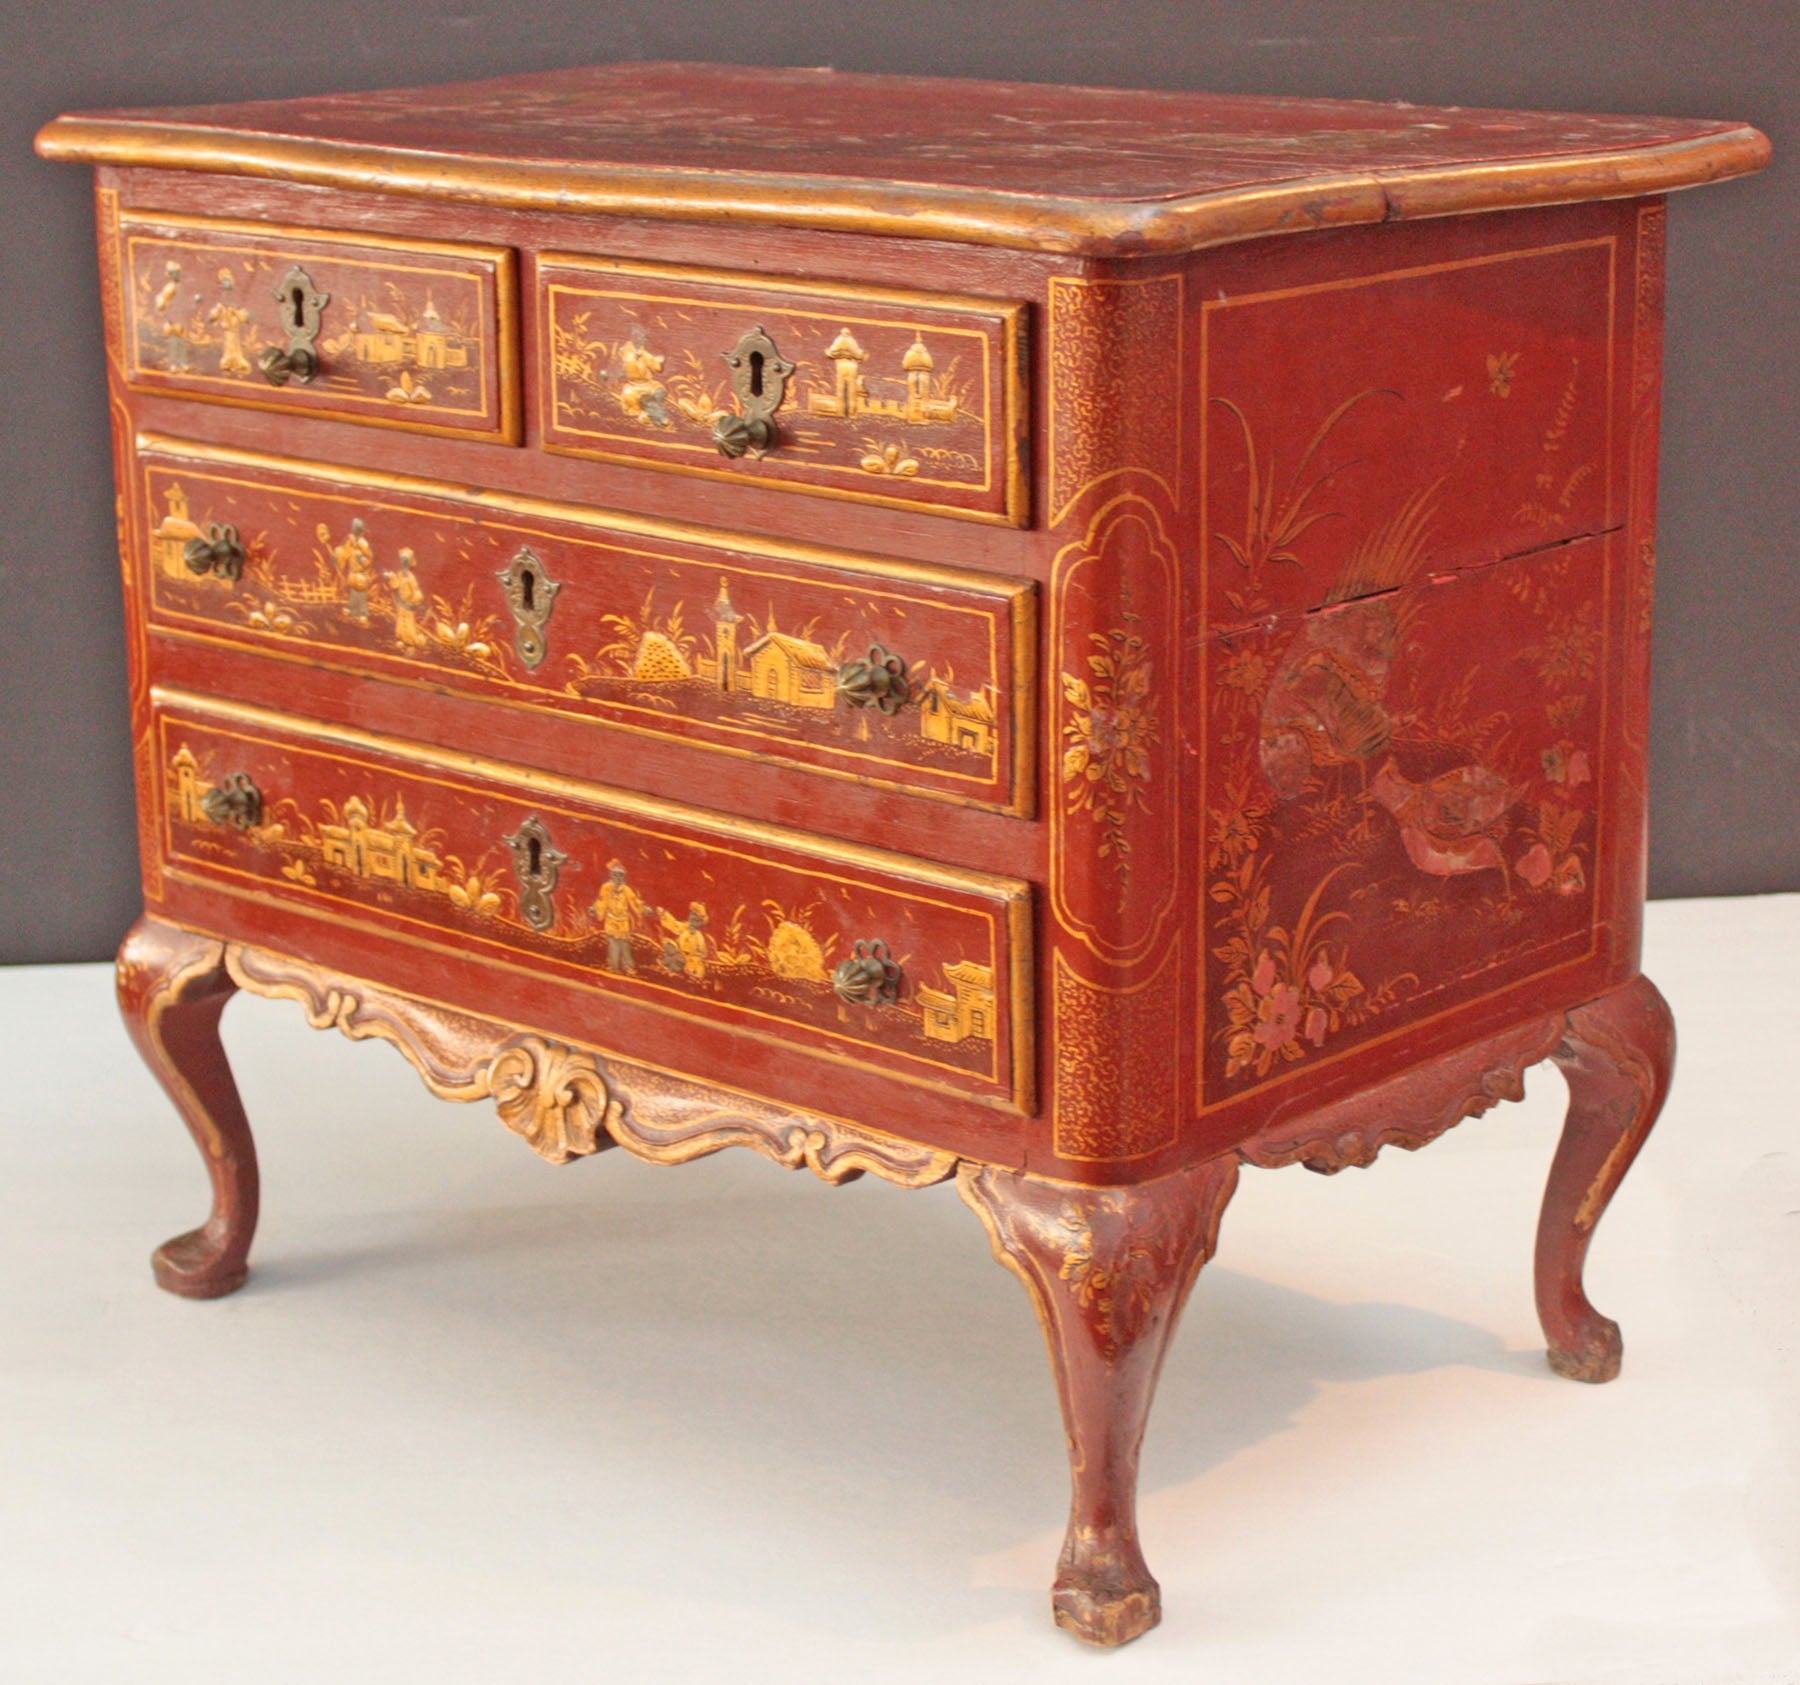 Small Red Chinoiserie Chest of Drawers